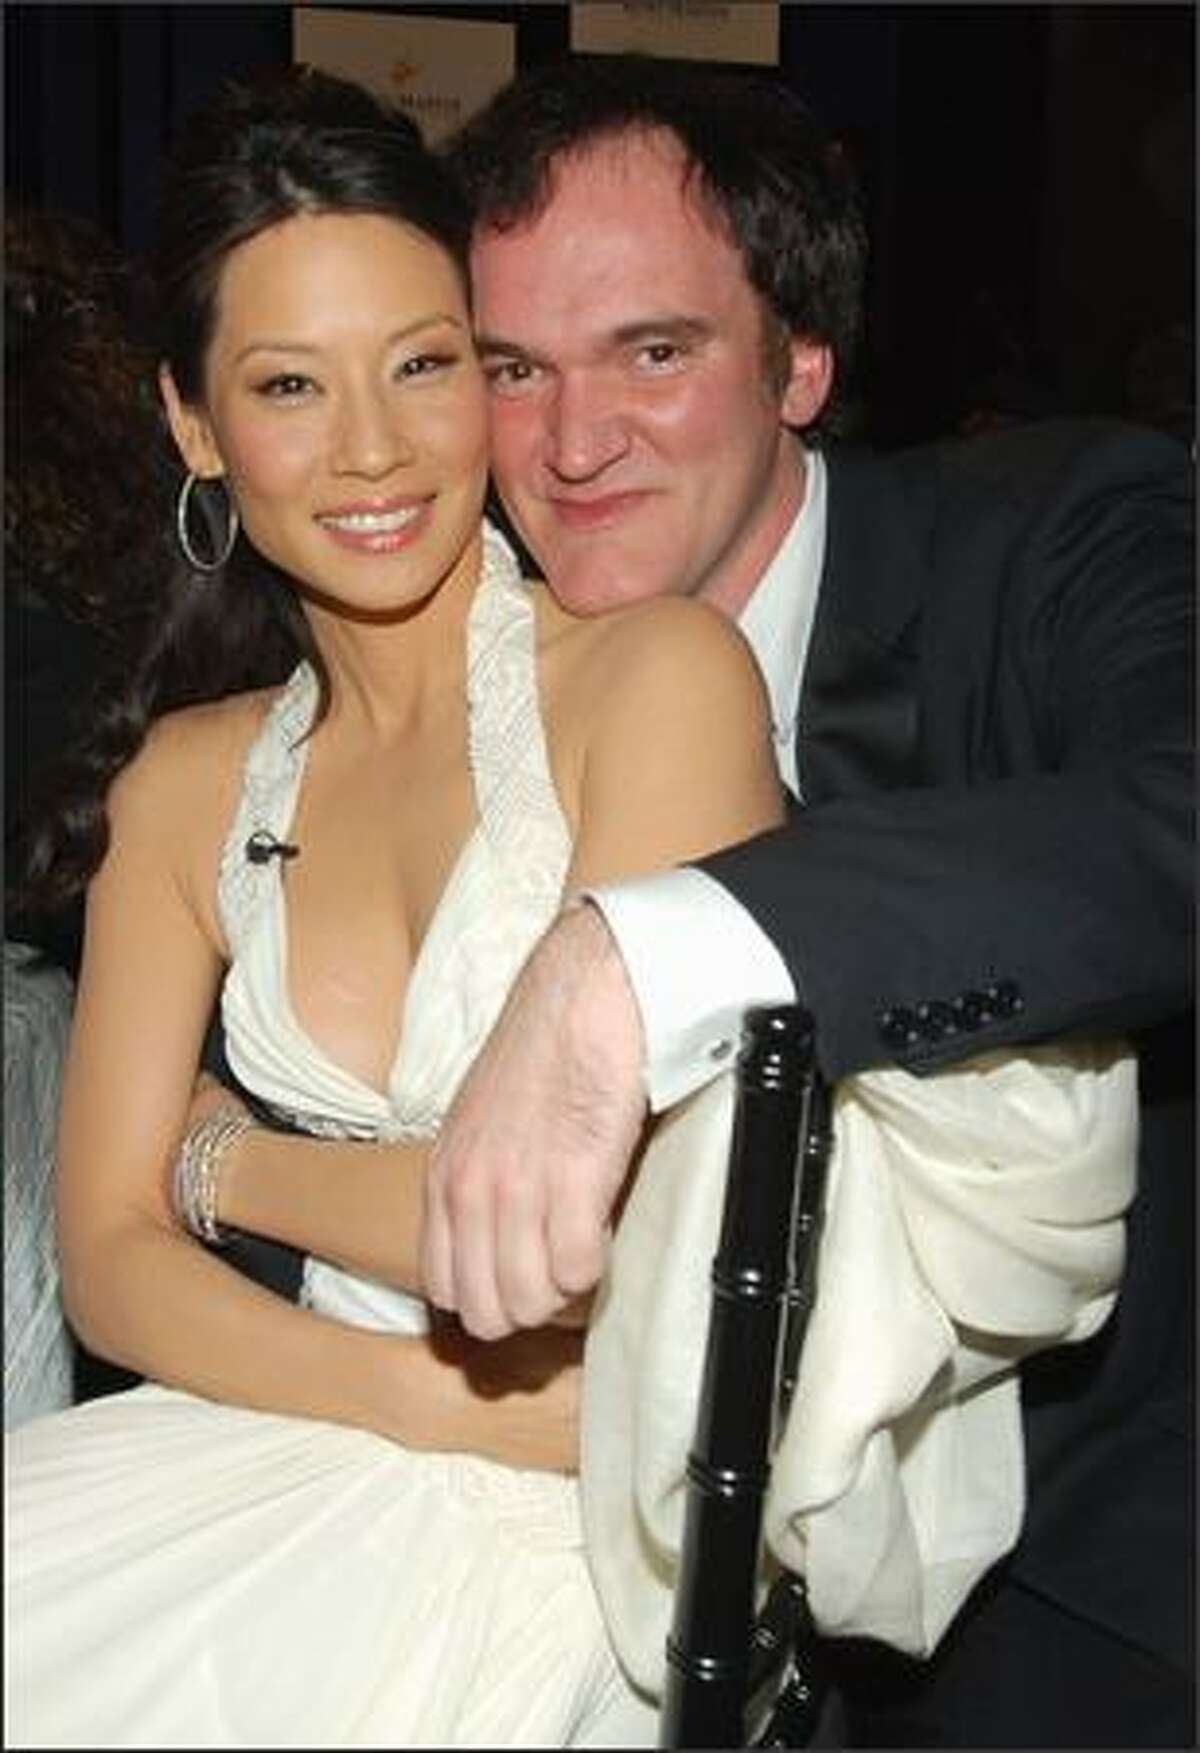 This is not part of an audition for the latest version of "Beauty and the Beast." Instead, actress babe Lucy Liu and chinmaster director Quentin Tarantino mug for the lens at the Asian Excellence Awards recently in L.A. where the two "Kill Bill" vets each received an award.